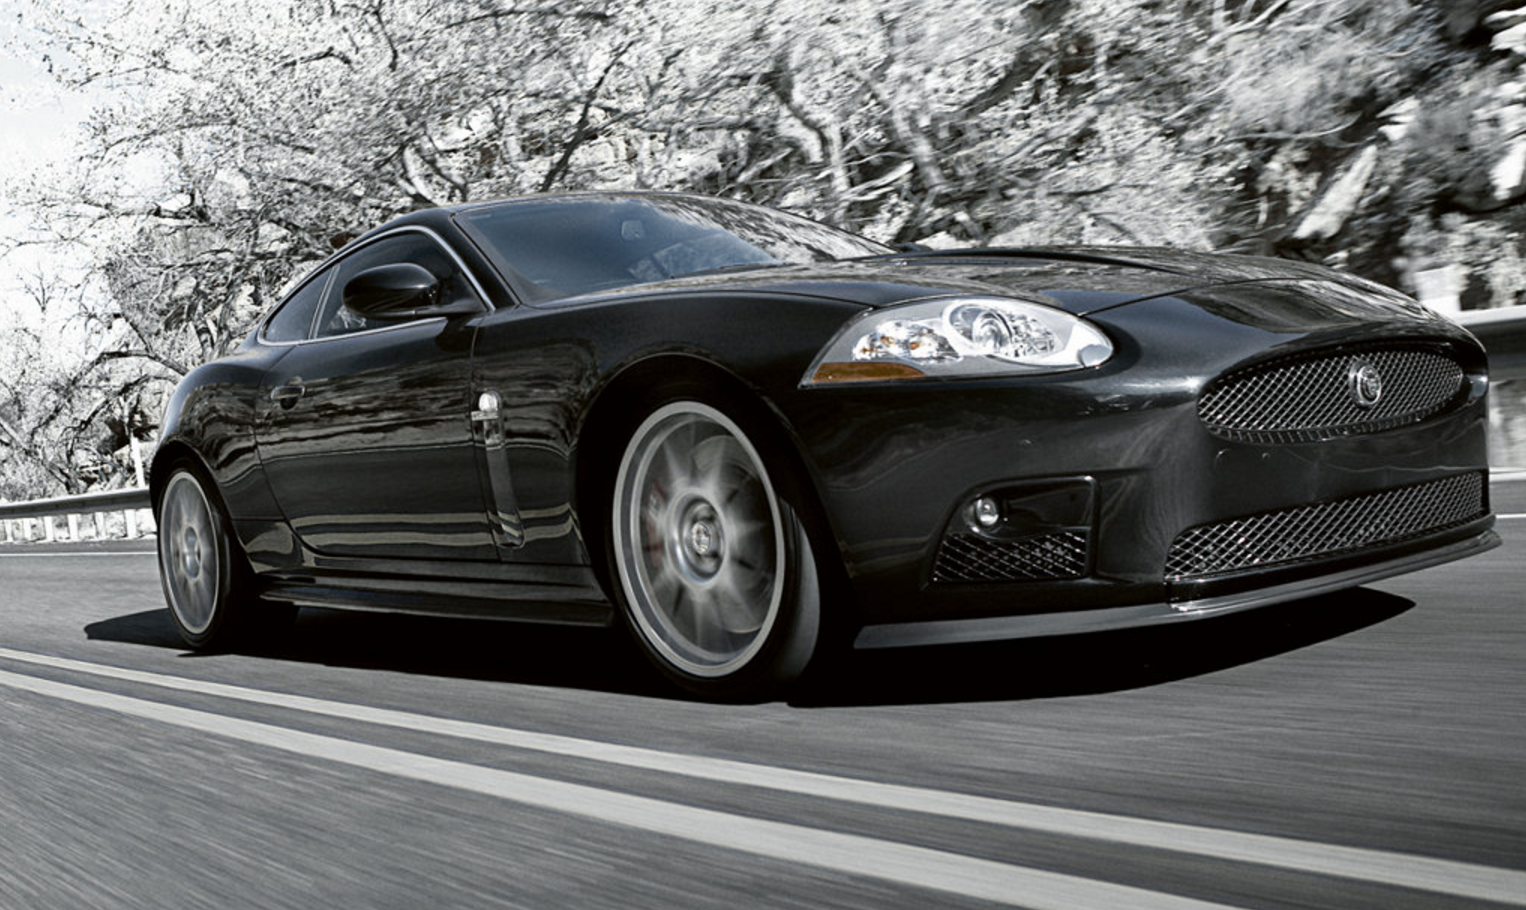 Jaguar XK-R 4.2 Supercharged Stage 2 Tuning File Revised by ChiptuneRS